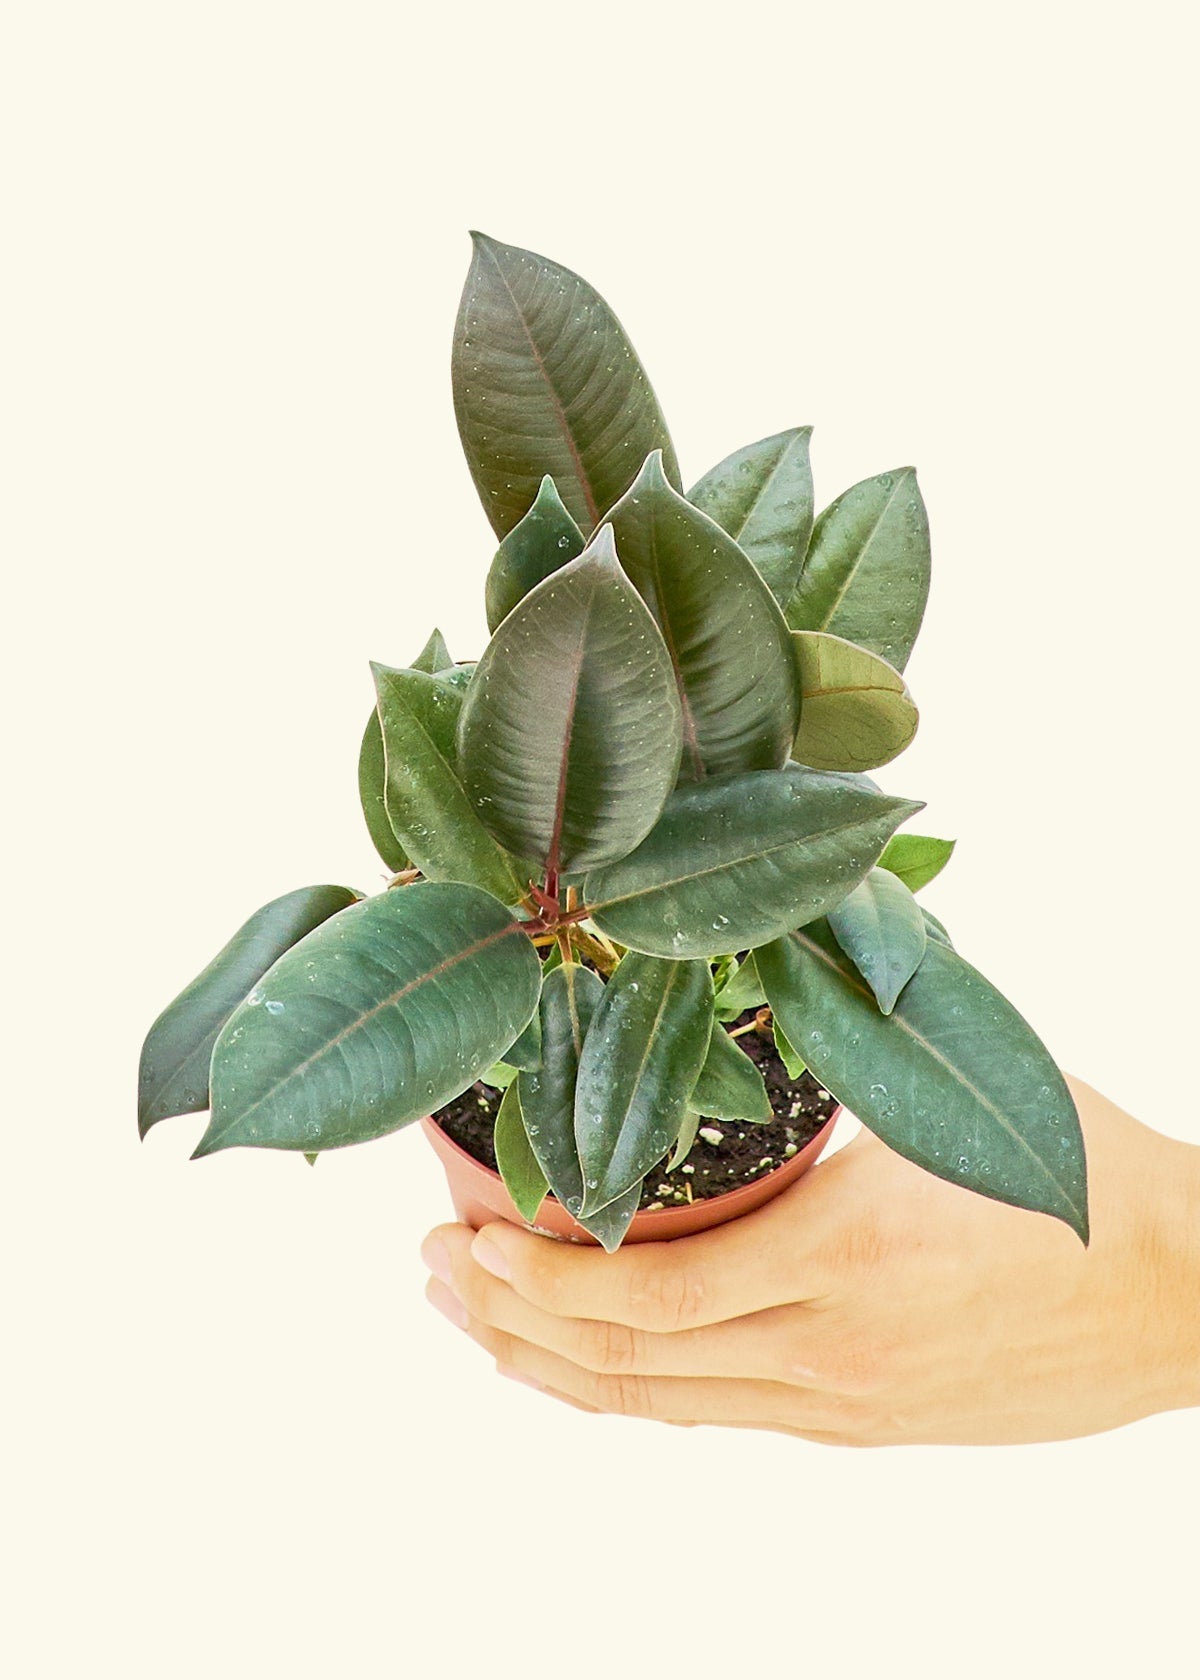 Small Rubber Tree 'burgundy' (Ficus elastica) in a grow pot.